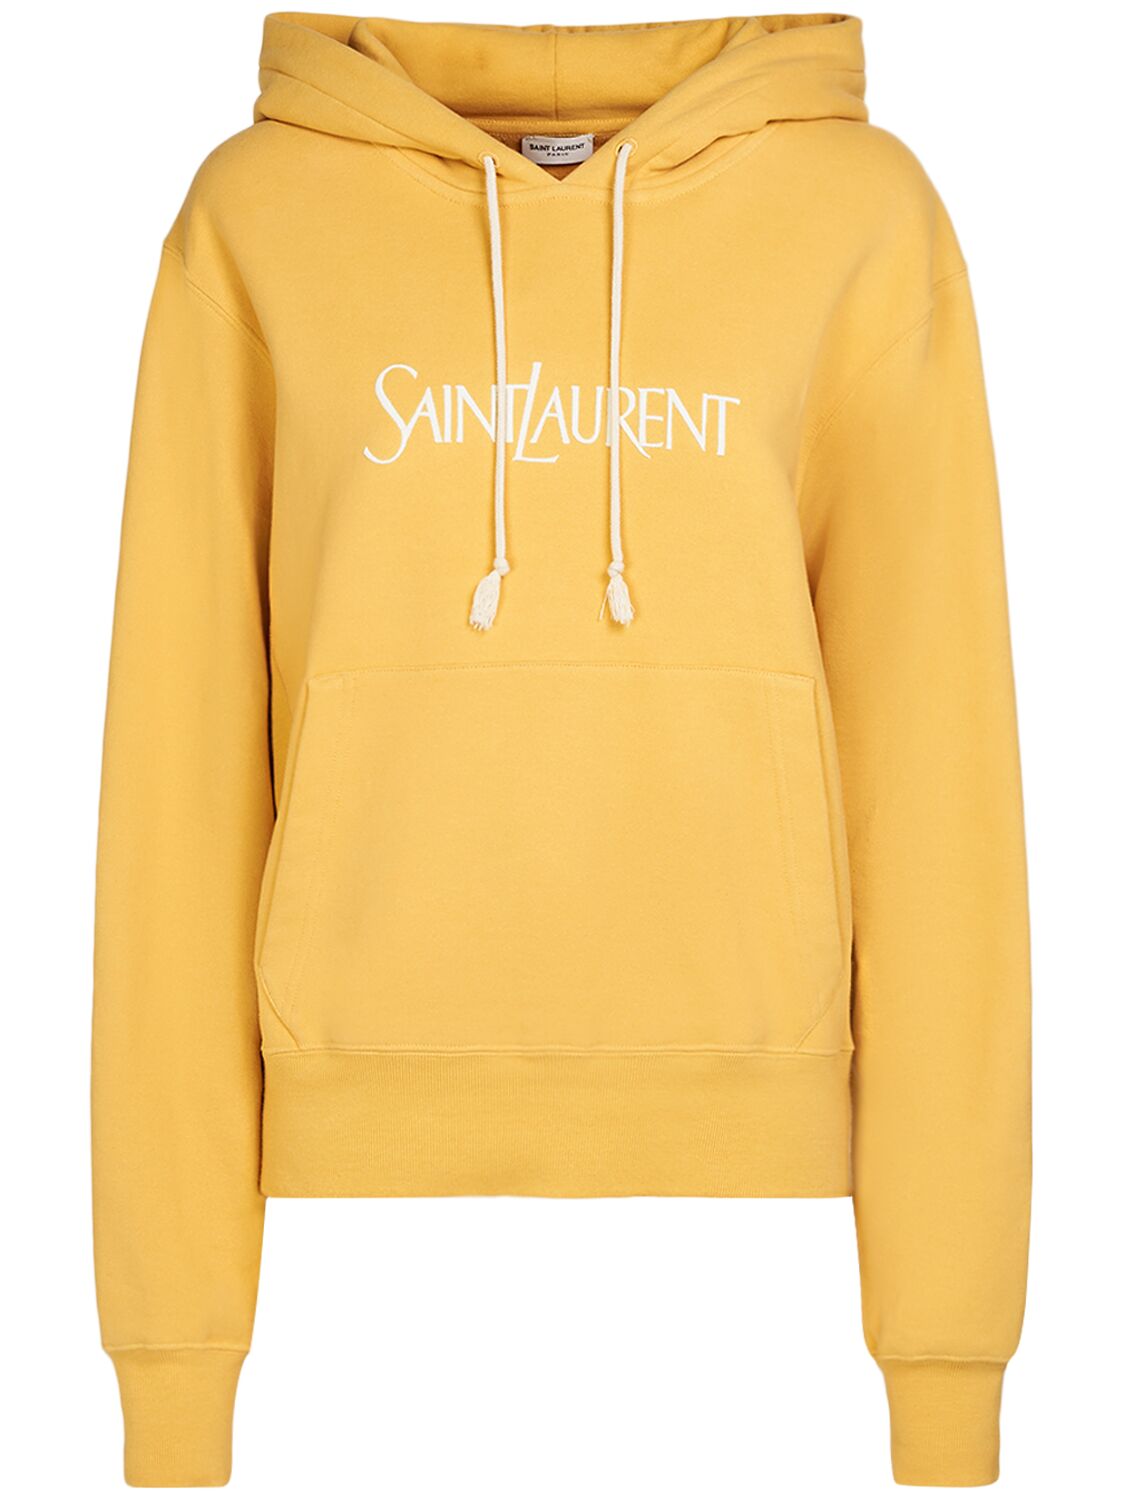 Saint Laurent Cotton Hoodie W/ Vintage Embroidery In Yellow